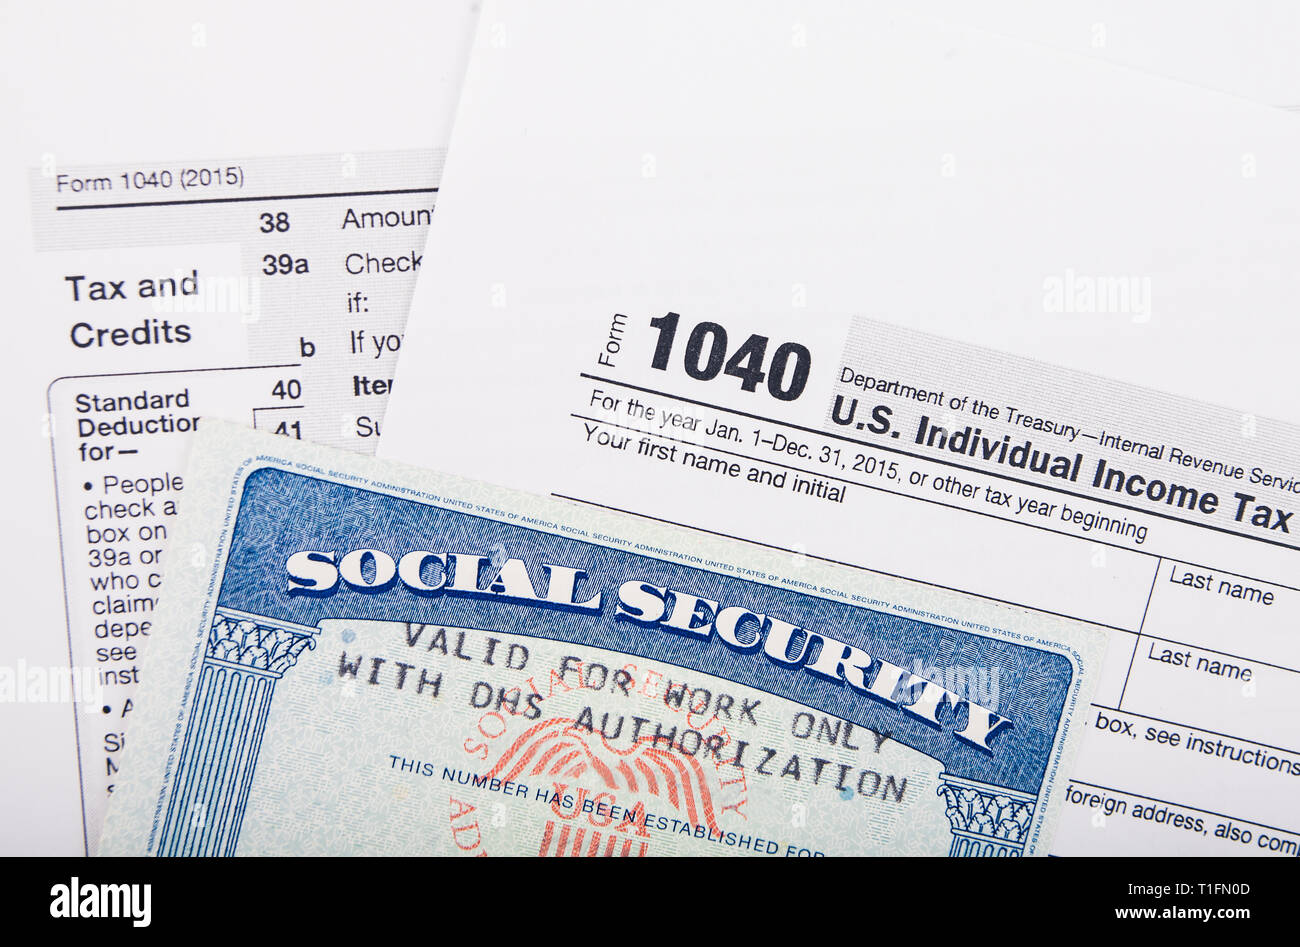 Tax Return Form And Social Security Number Card Stock Photo Alamy